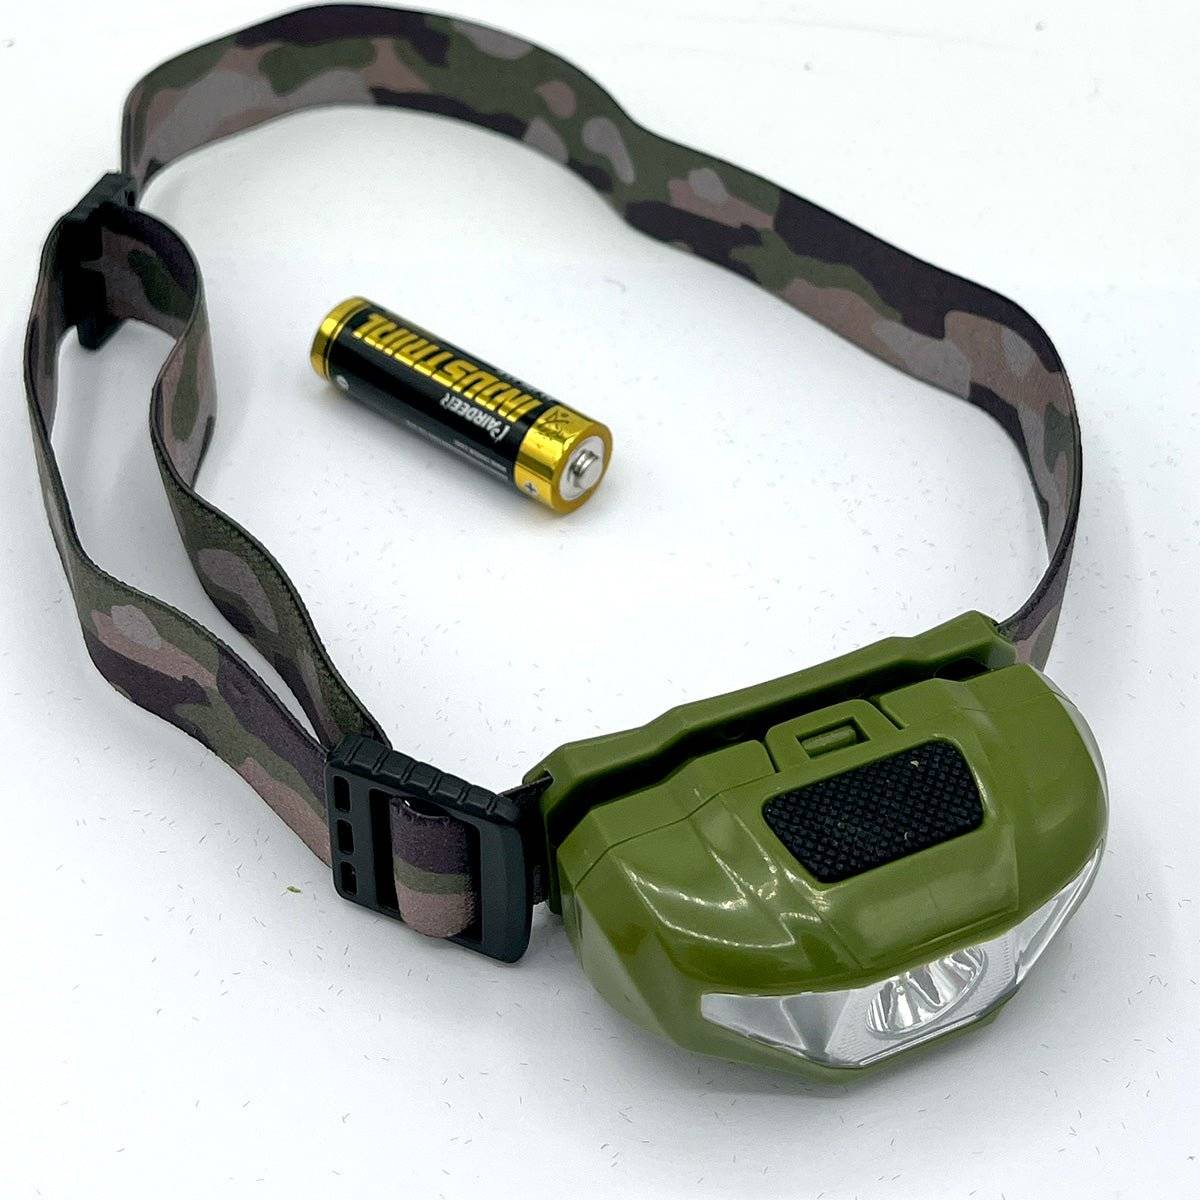 Silverpoint Infantry Head Torch with Red/Light Light - John Bull Clothing